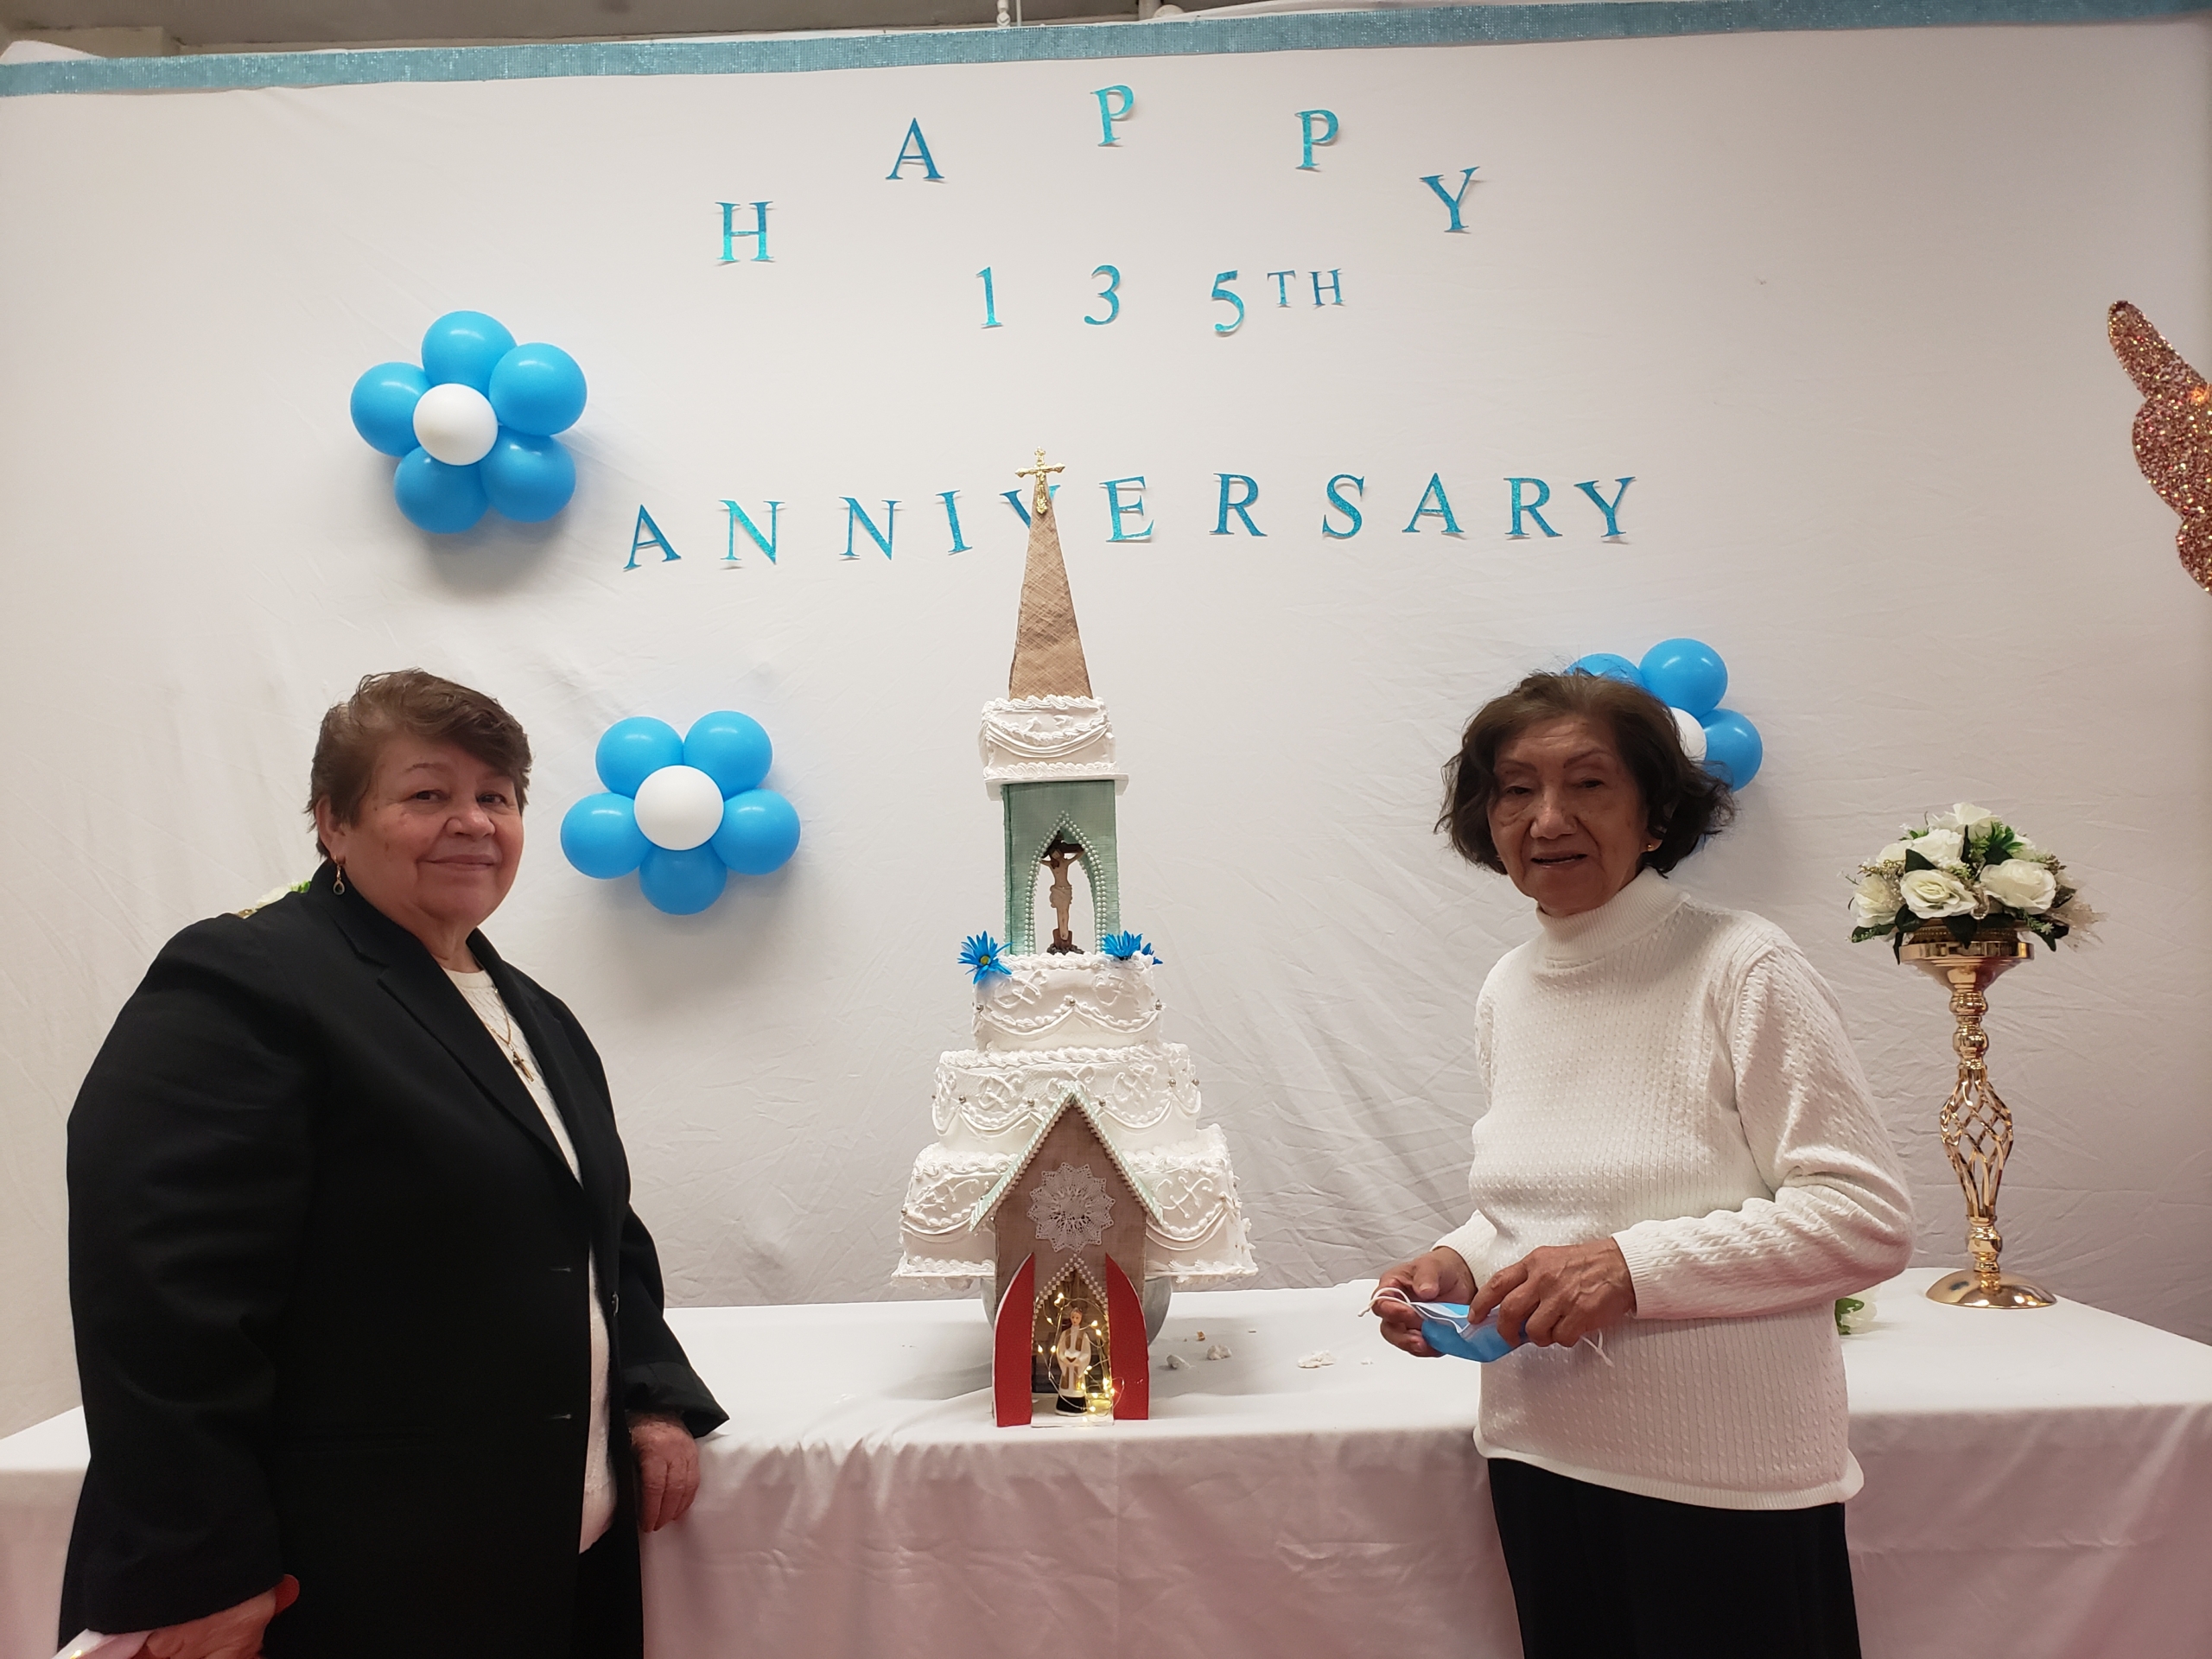 Two women standing in front of a cake.